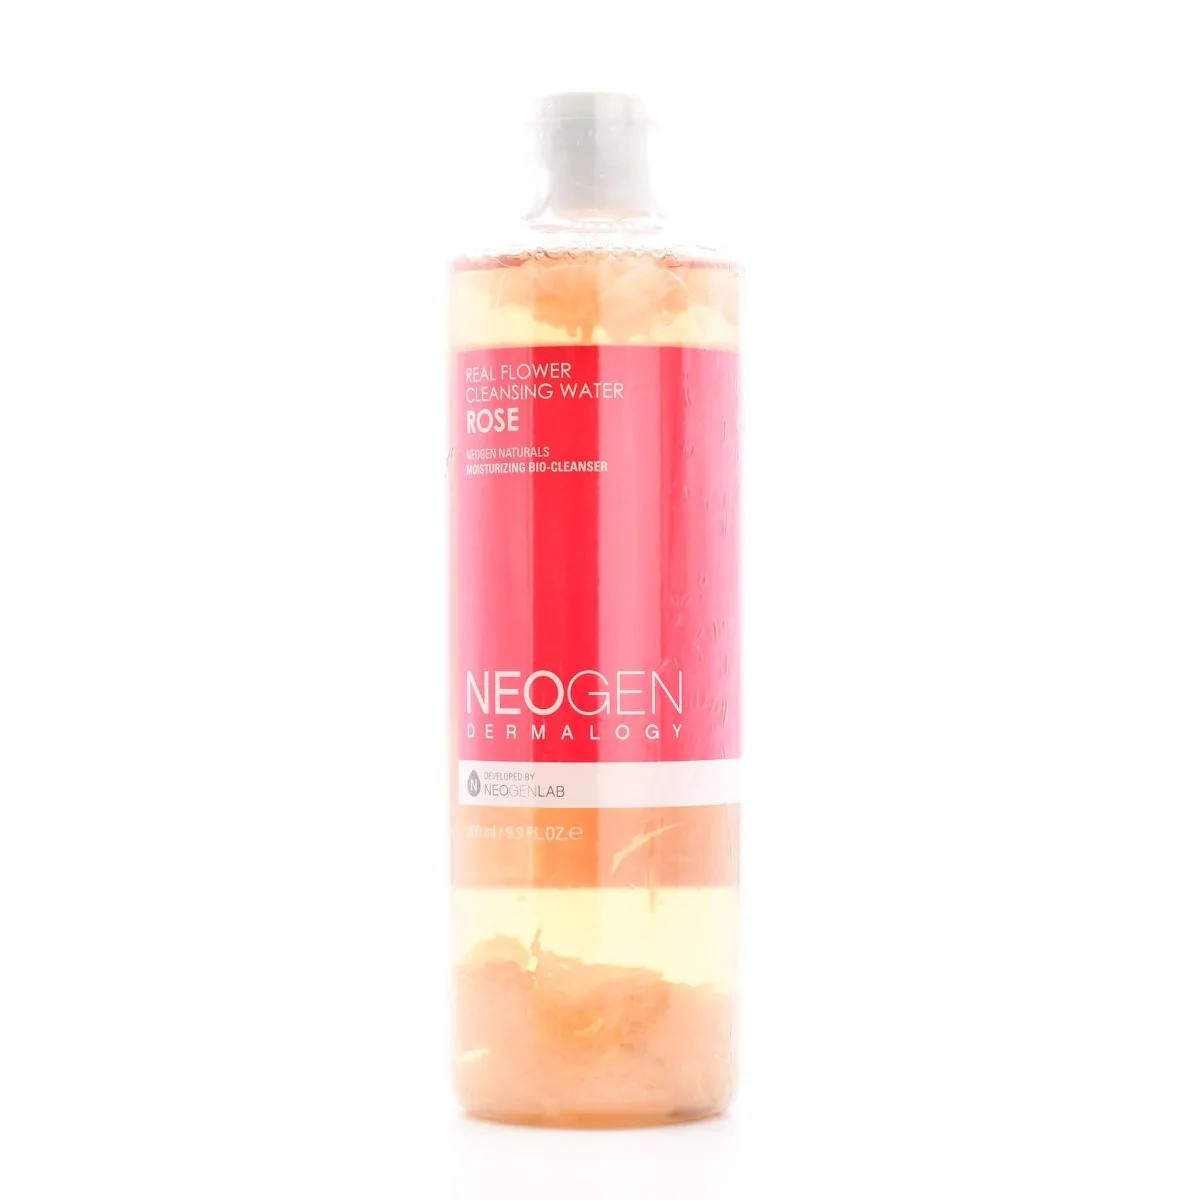 Real Flower Cleansing Water Rose